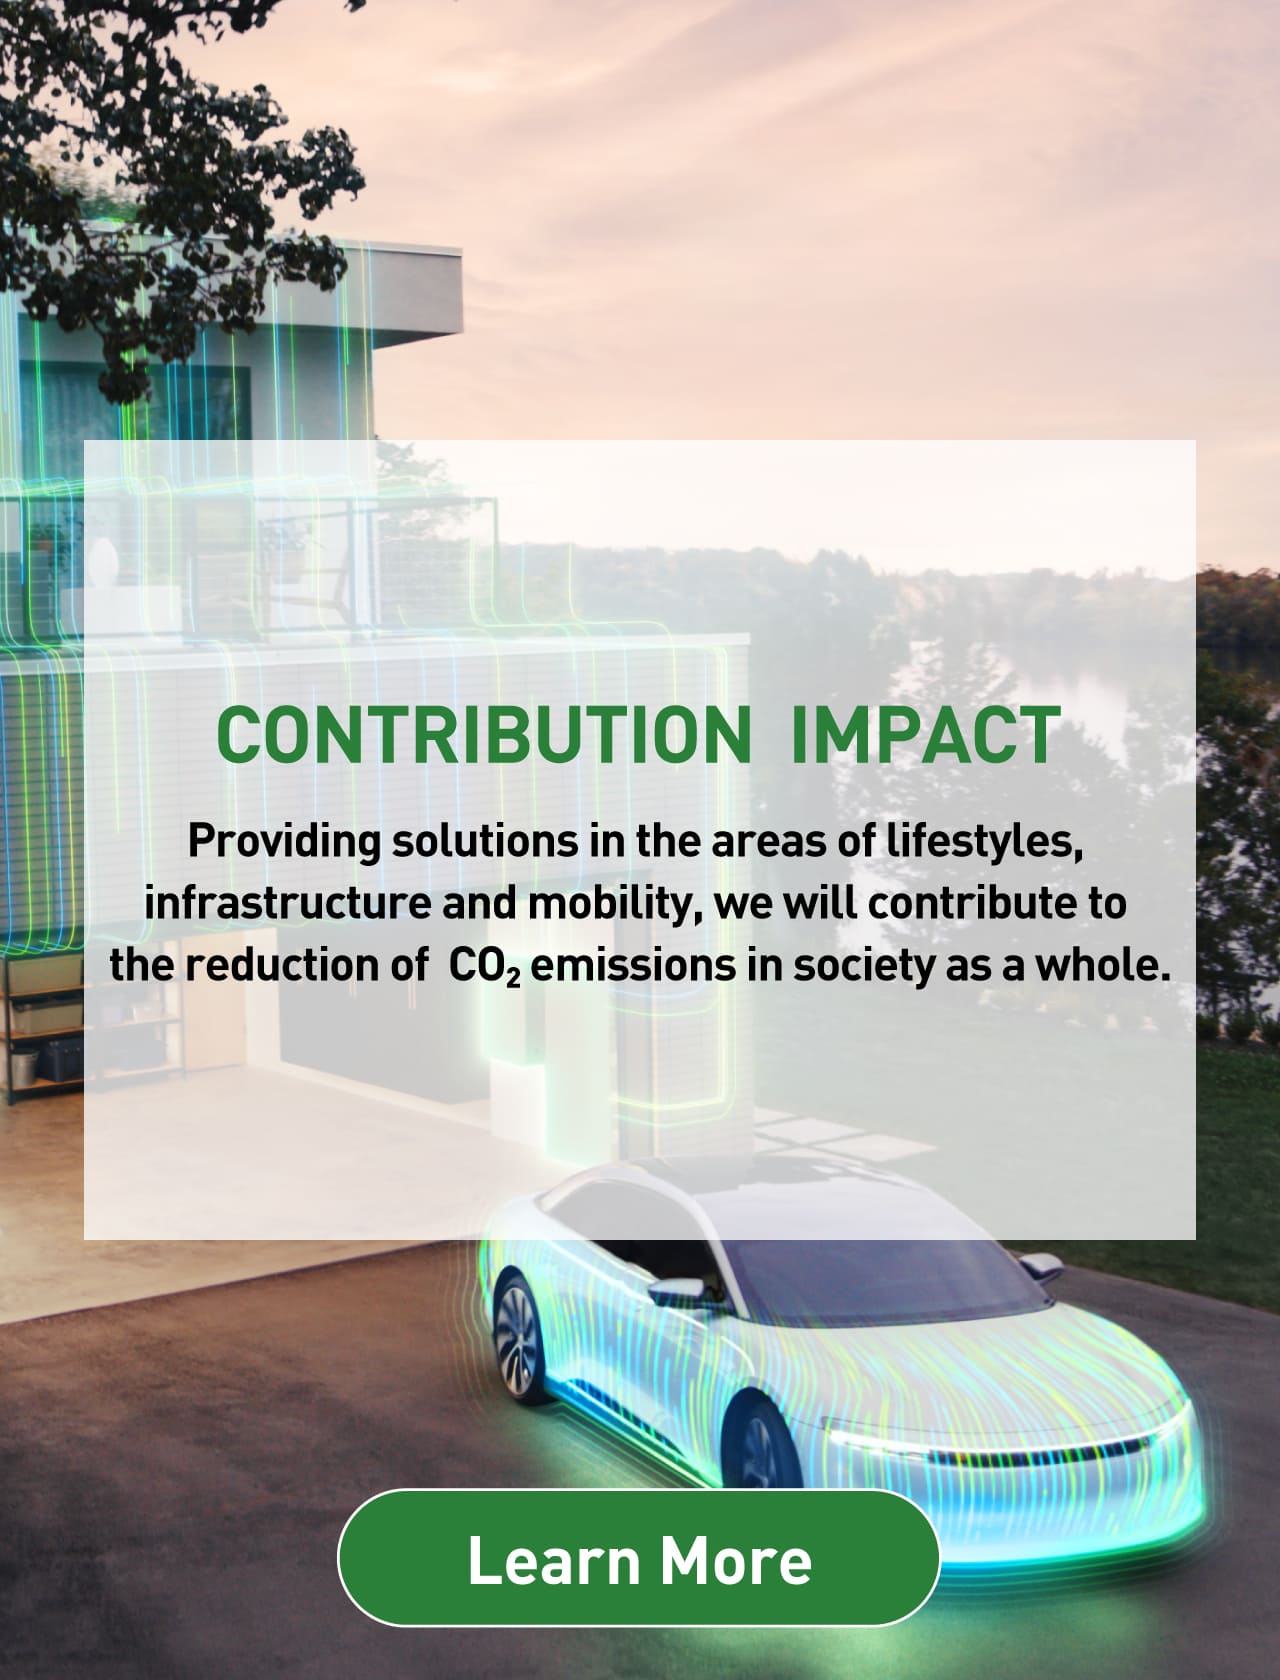 CONTRIBUTION IMPACT: Providing solutions in the areas of lifestyles, infrastructure and mobility, we will contribute to the reduction of CO2 emissions in society as a whole. Background photo: CGI image of an electric vehicle. Learn more.